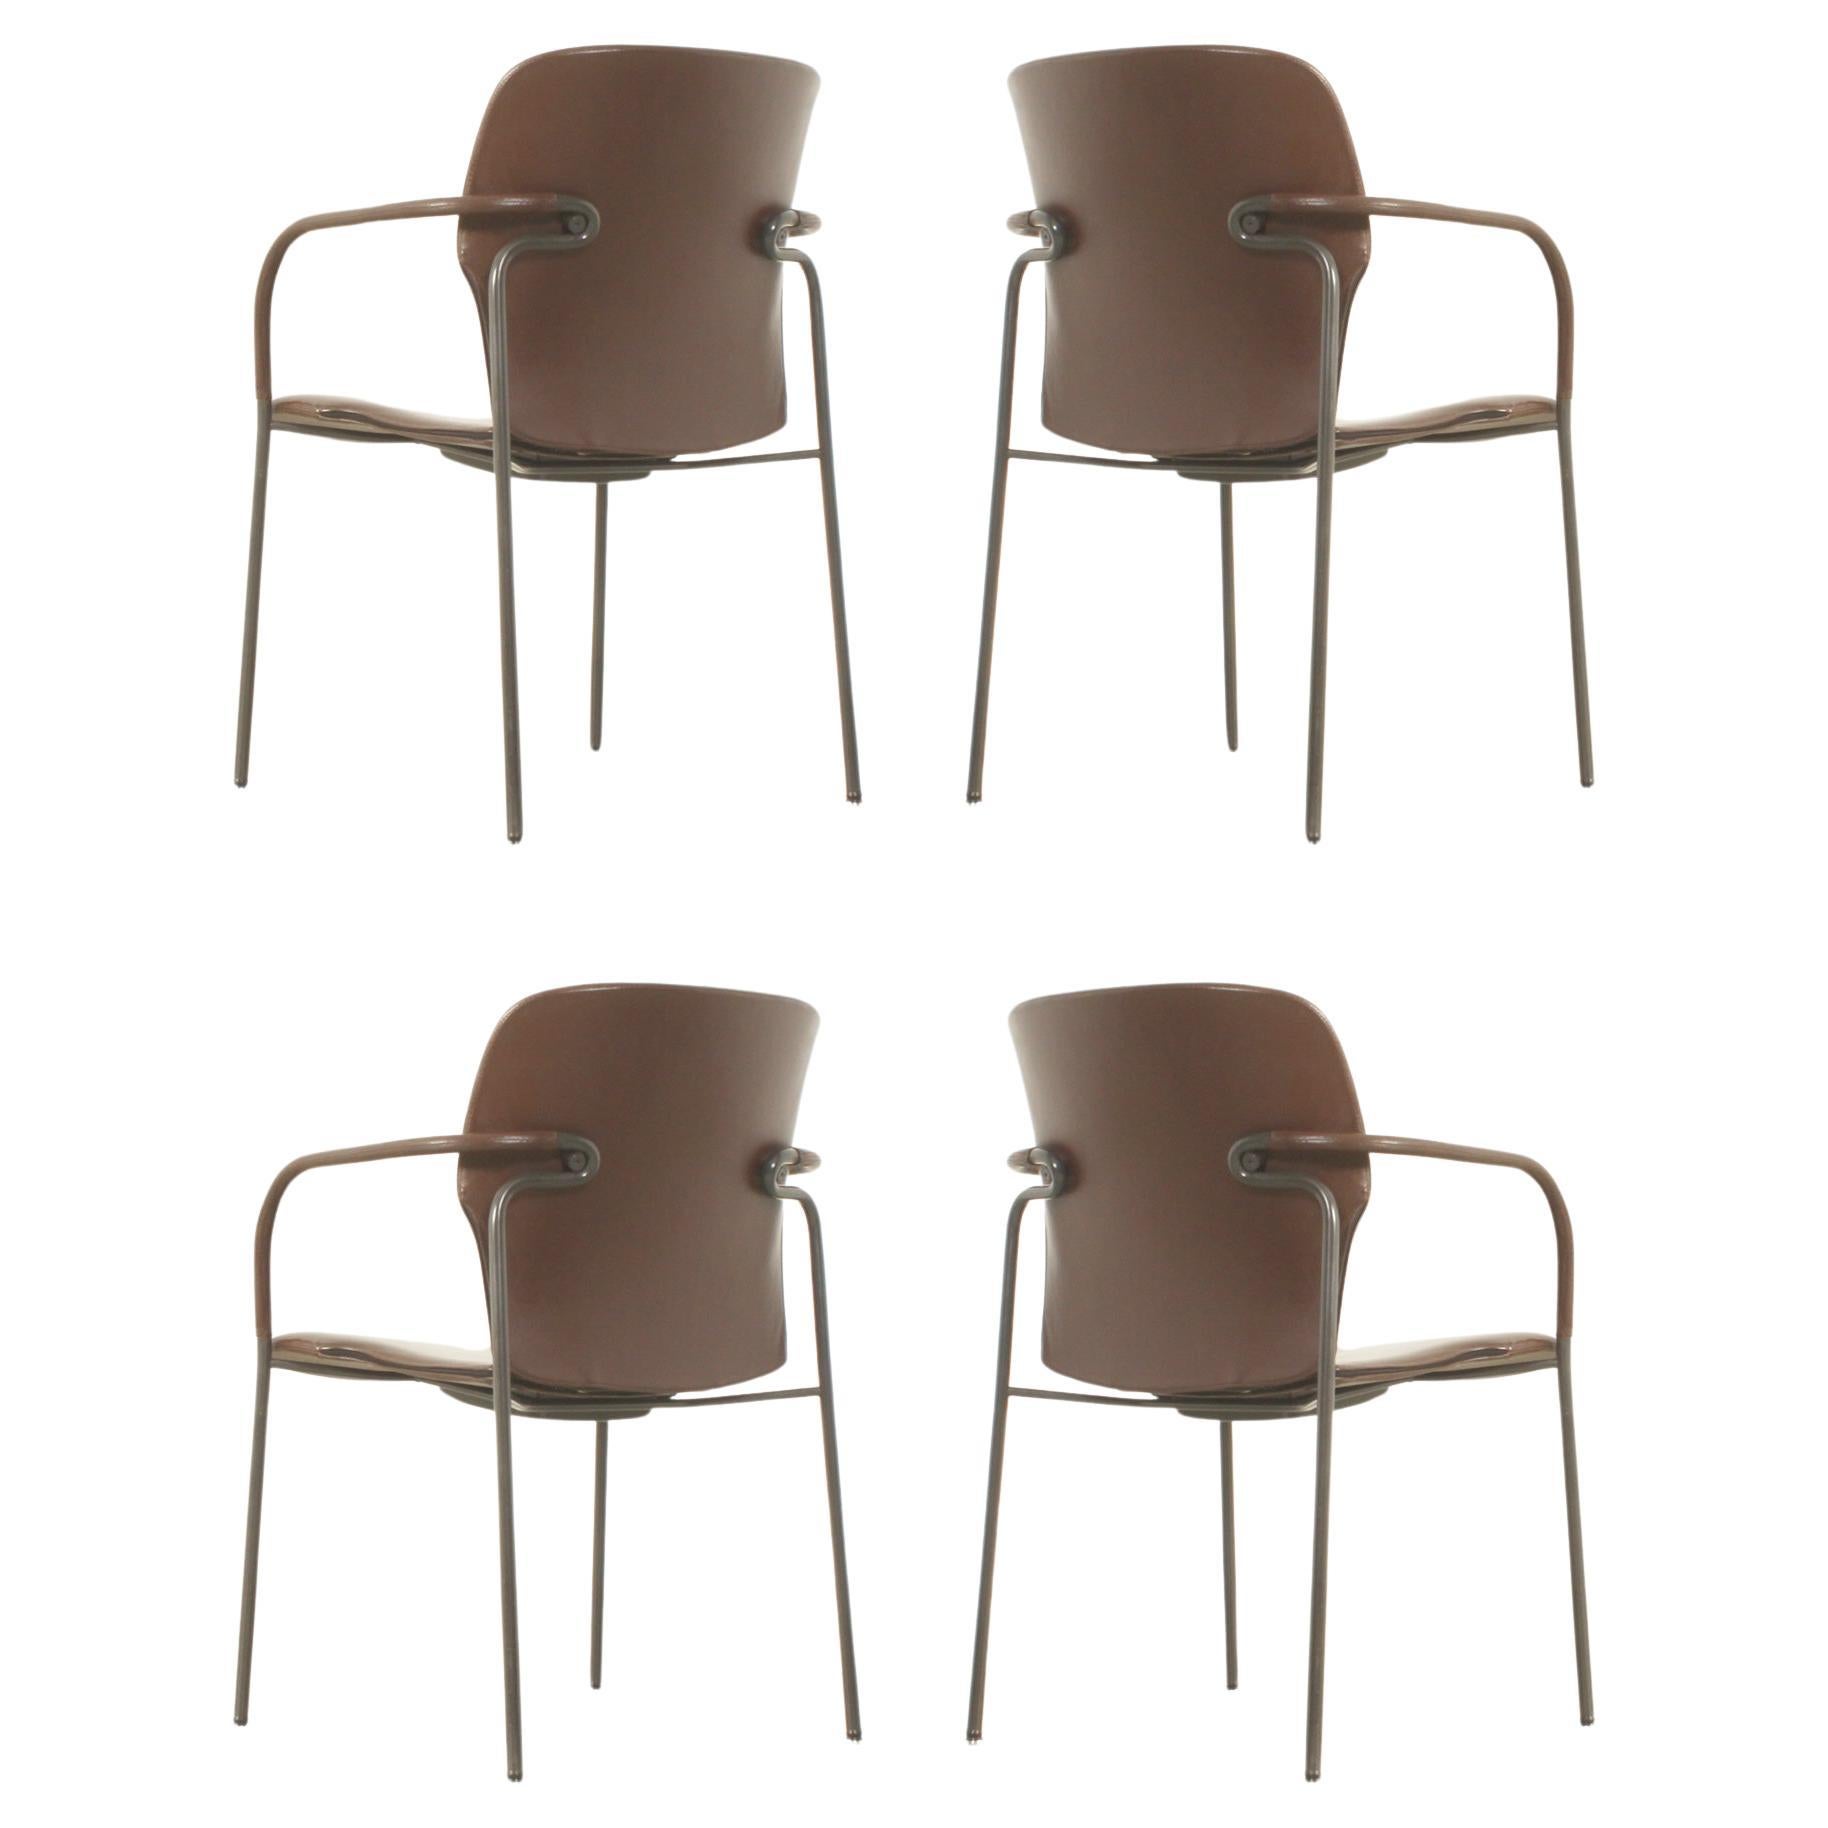 Four Leather Lalanda Chairs by Gianfranco Frattini, 1980's For Sale